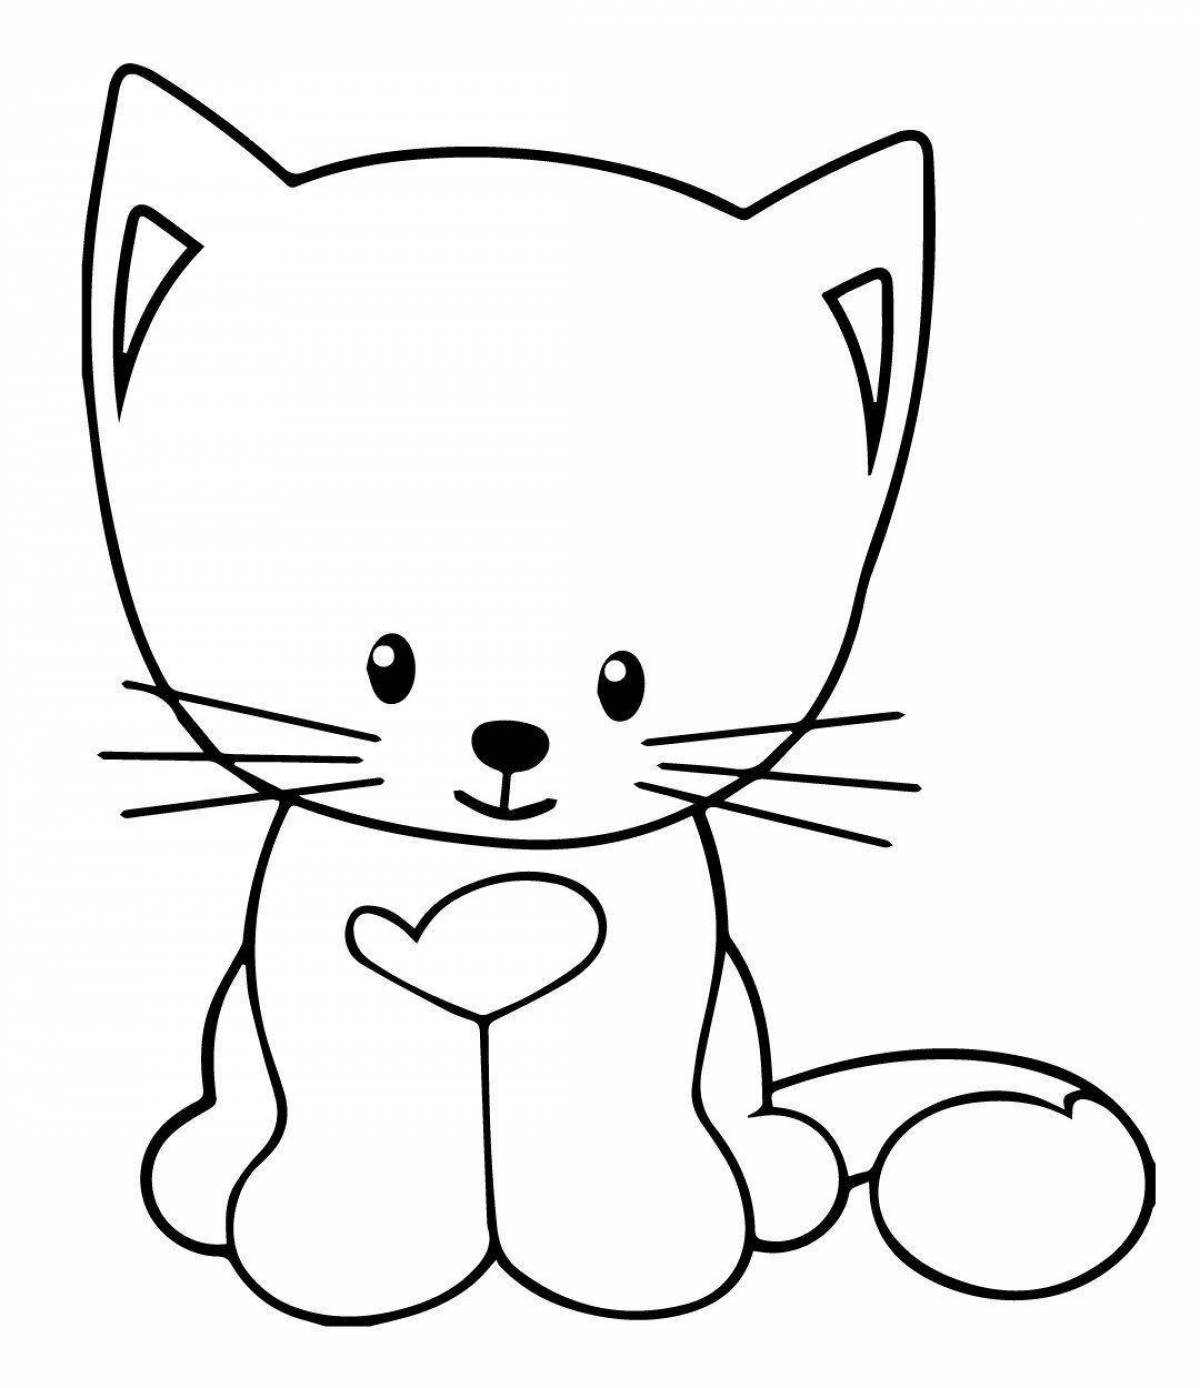 Live coloring cat for children 2-3 years old